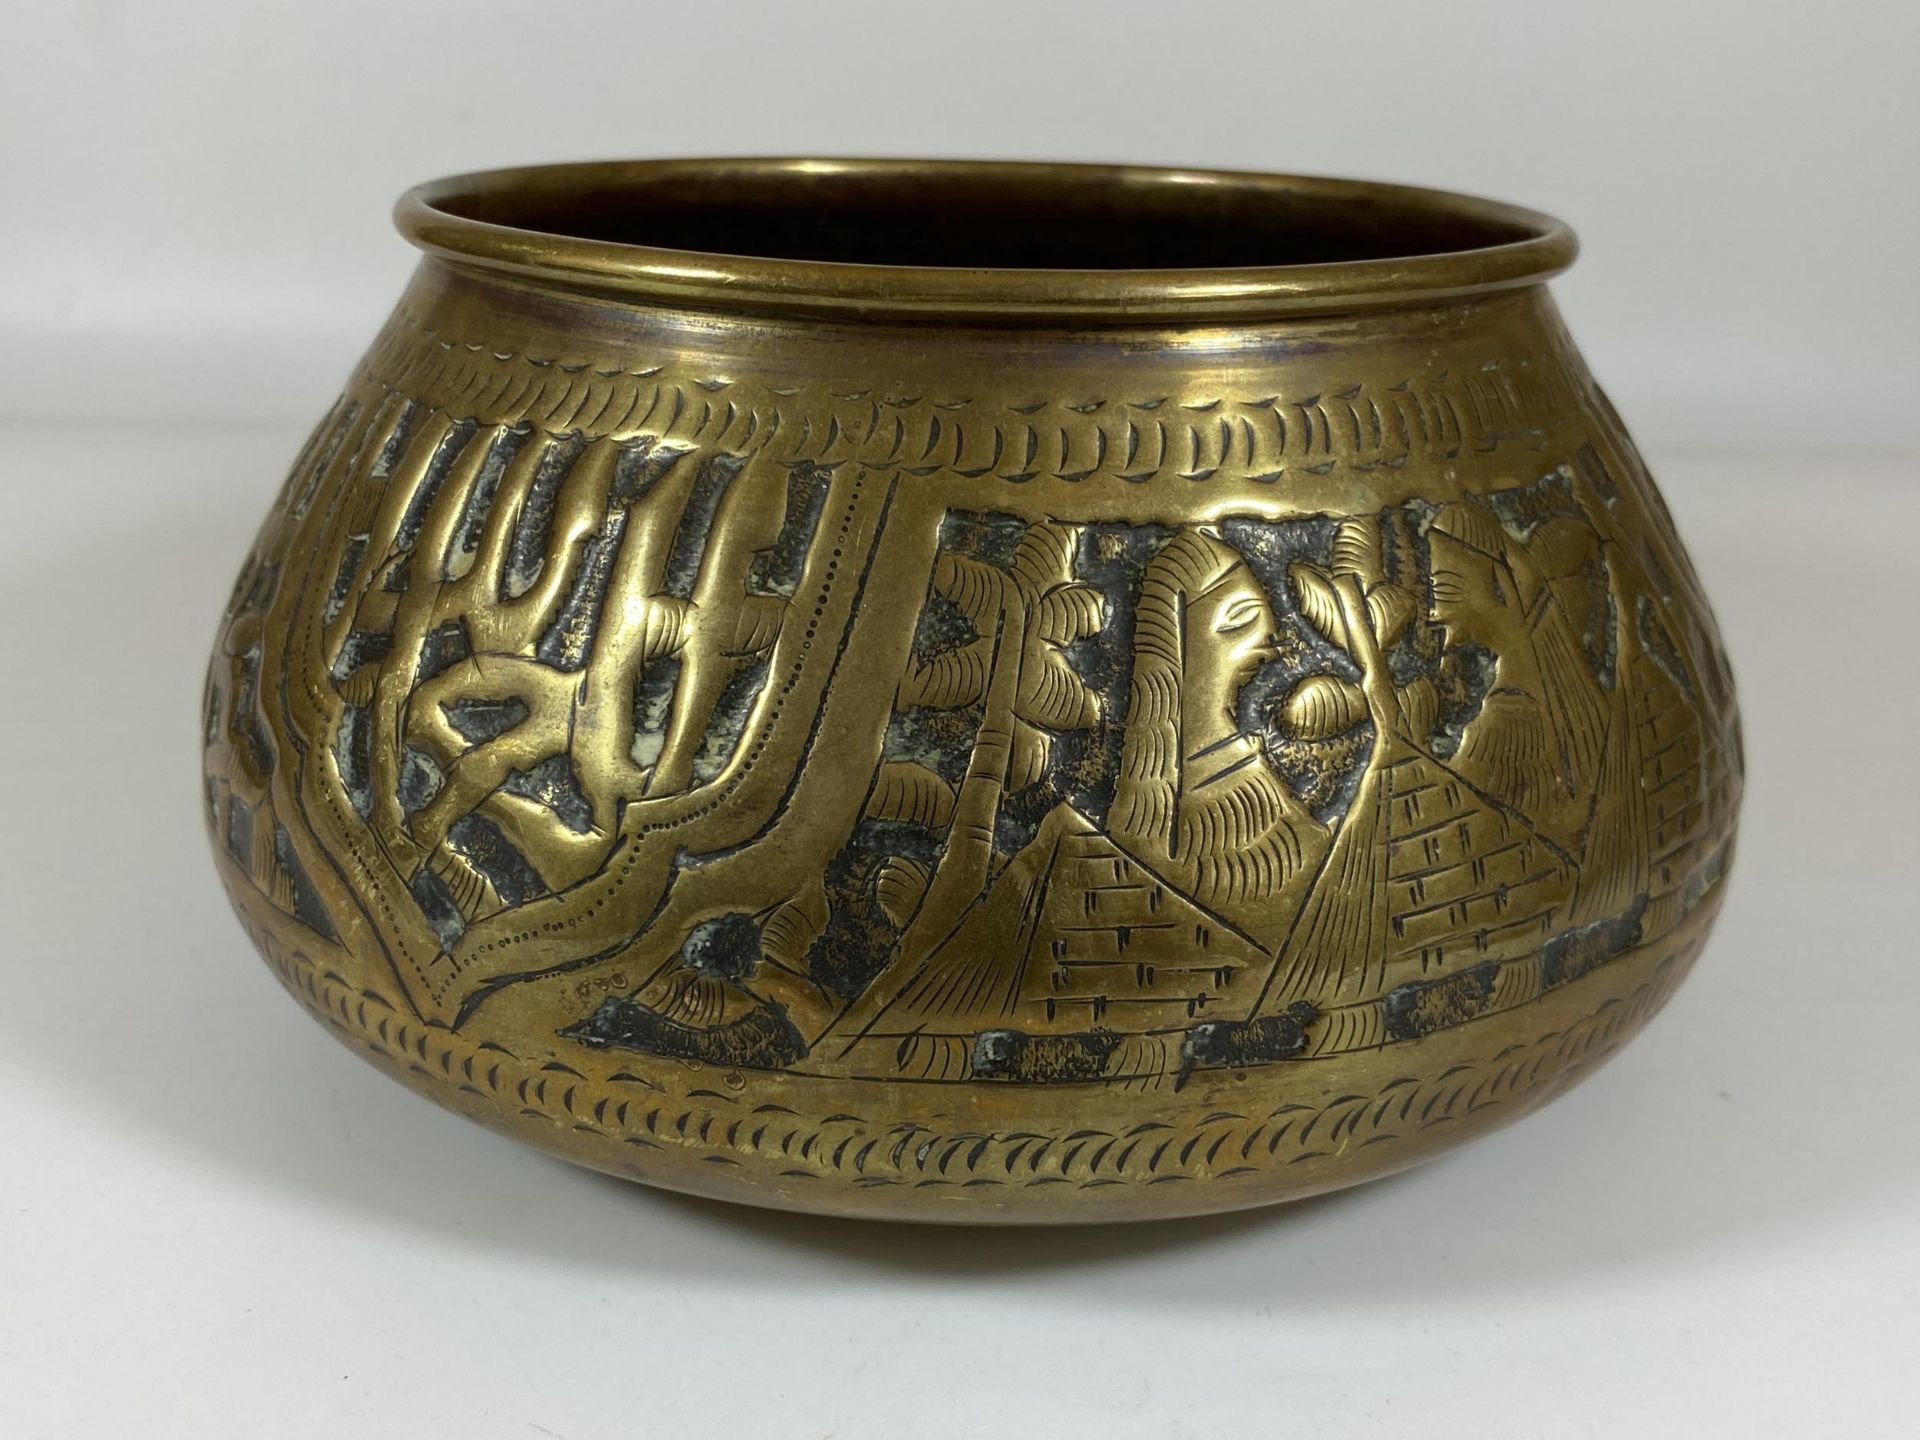 A VINTAGE MIDDLE EASTERN BRASS BOWL WITH FIGURES AND ANIMAL DESIGN, HEIGHT 10CM - Image 2 of 5